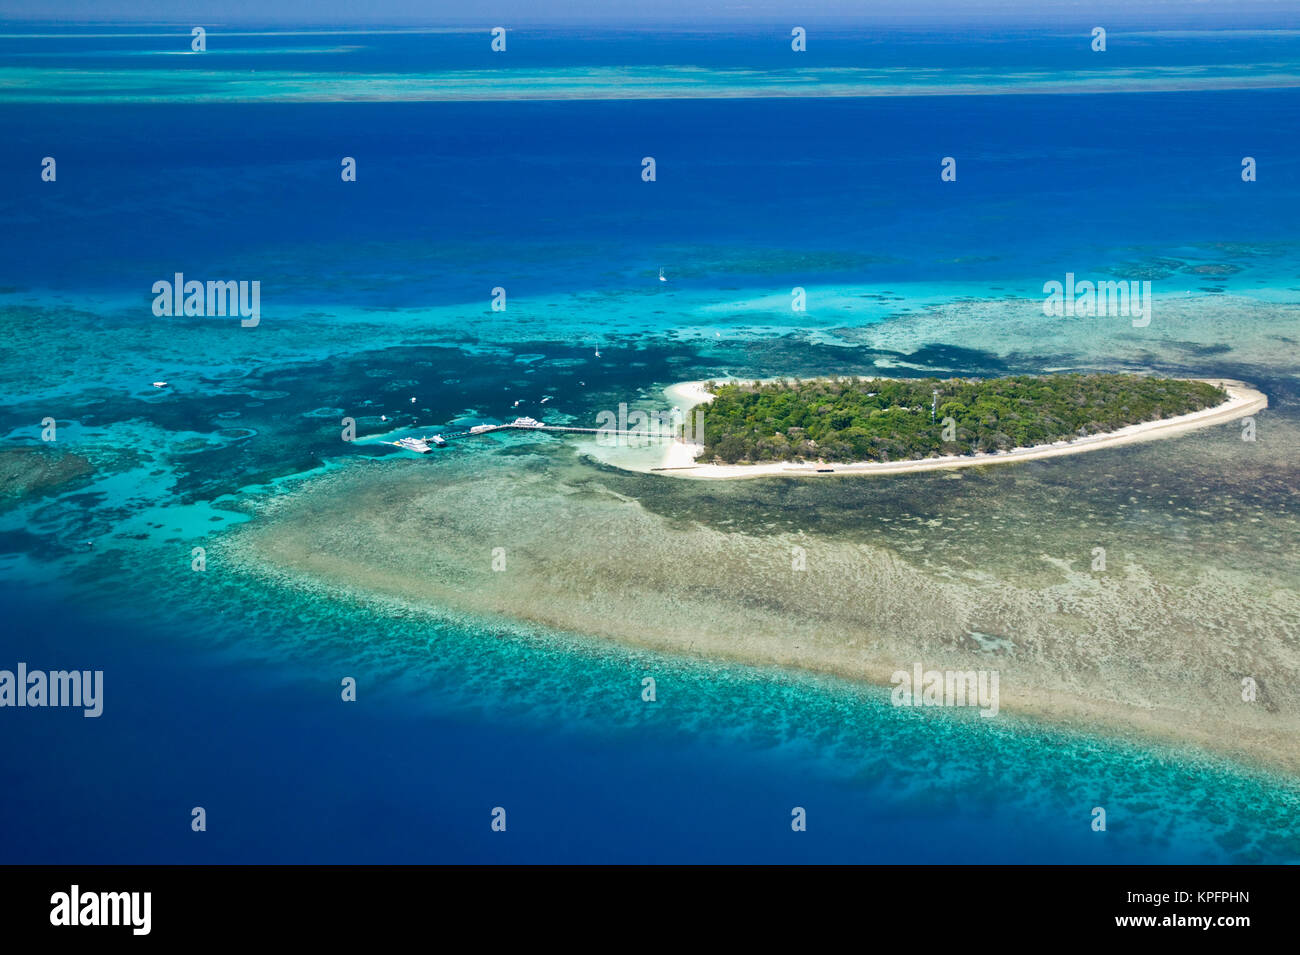 Australia, Queensland, North Coast, Cairns Area. The Great Barrier Reef- Aerial View of Green Island. Stock Photo